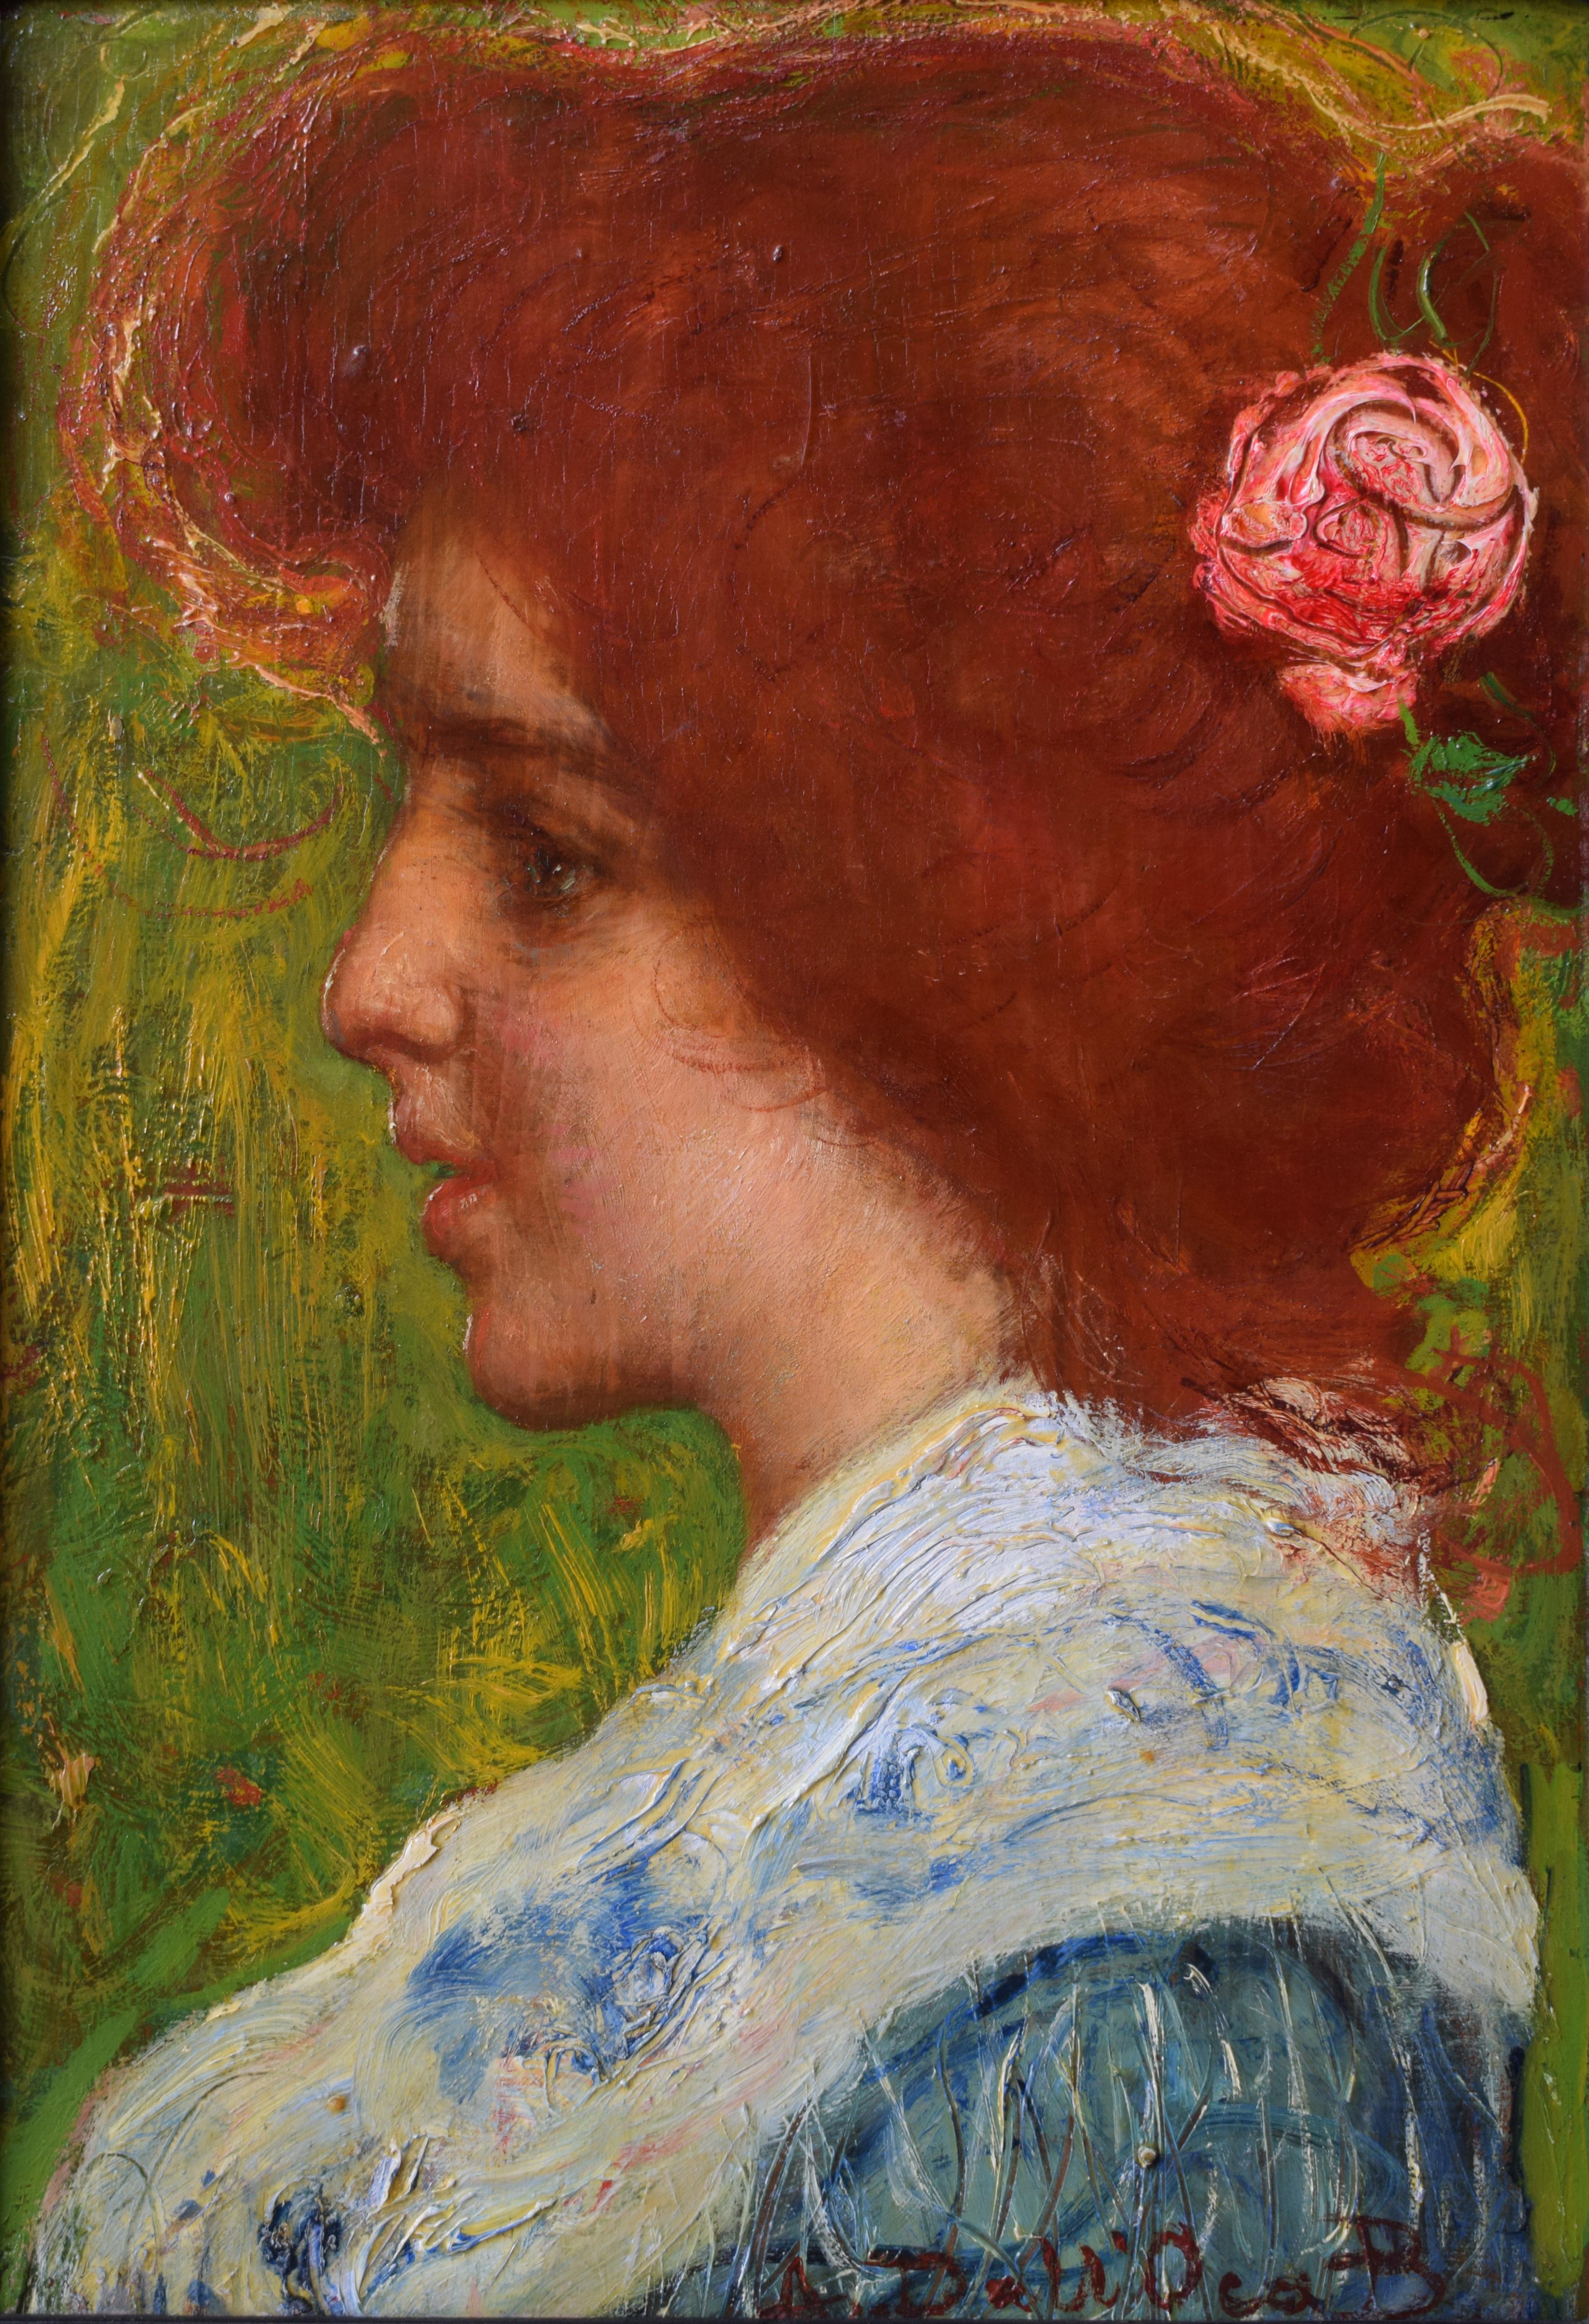 Angelo Dall’Oca Bianca Portrait Painting - Profile of Maiden with Rose